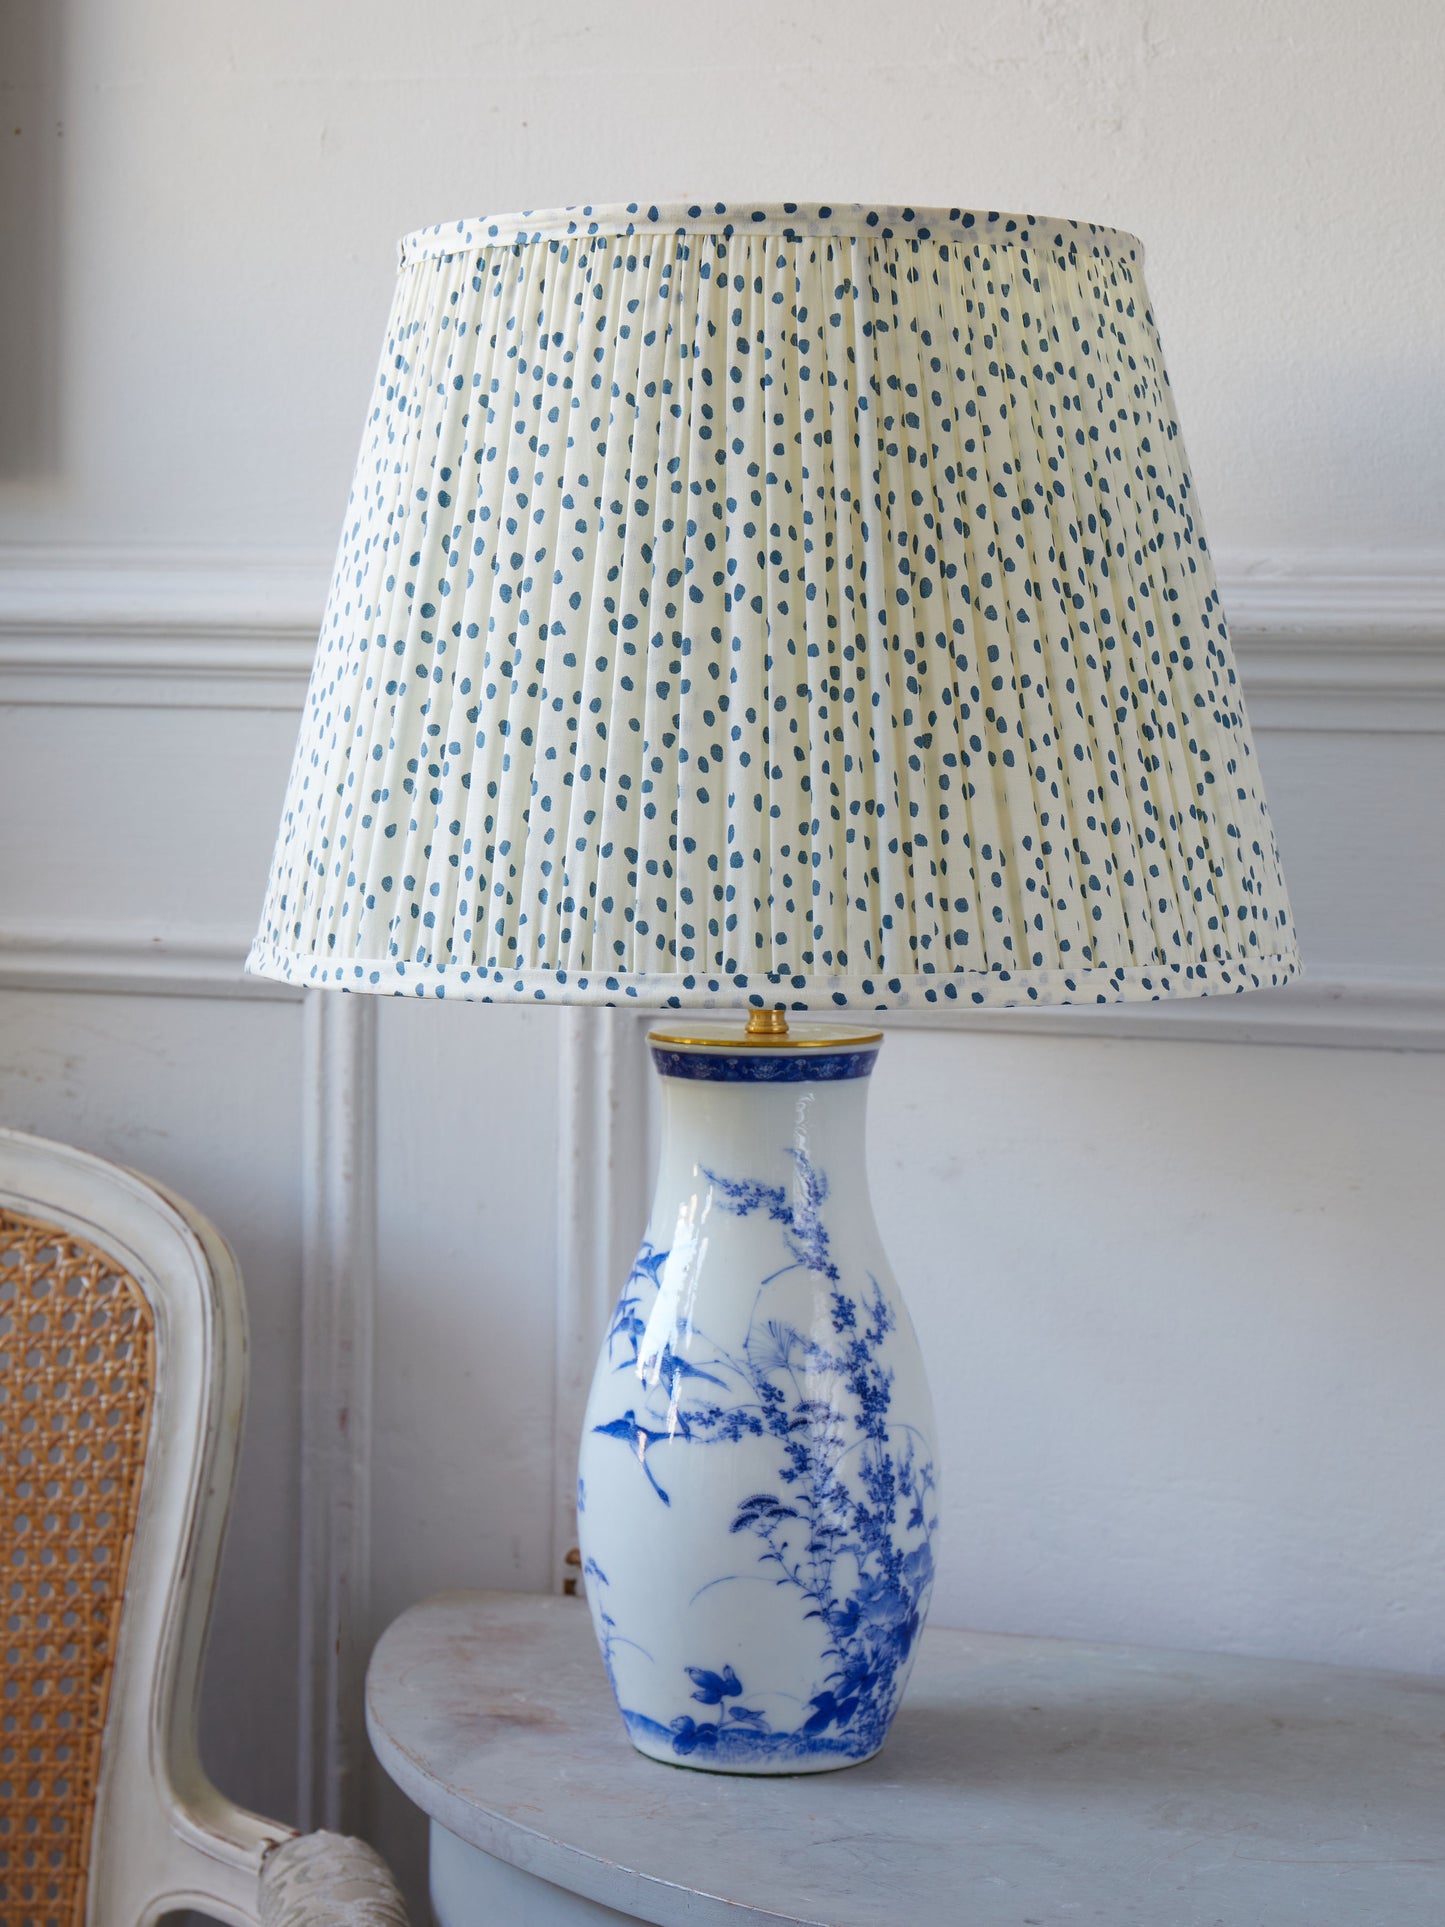 A Decorative Blue and White Chinoisserie Lamp with Polka Dot Shade